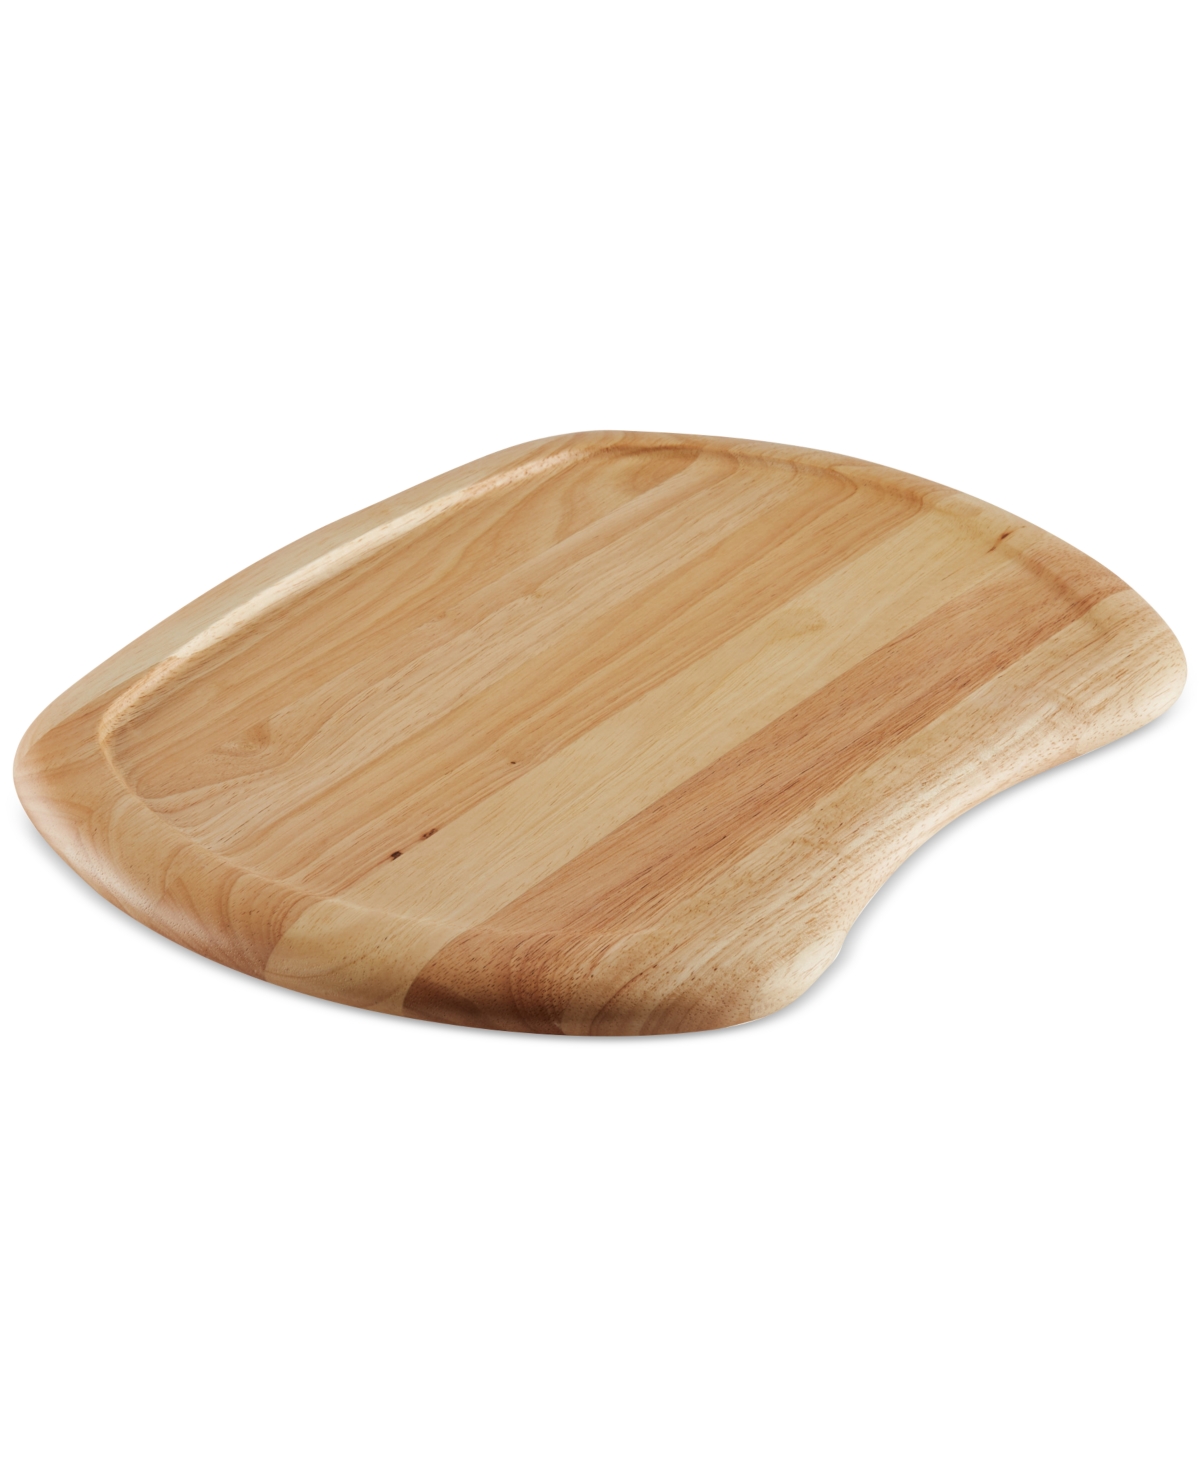 Ayesha Curry Home Collection Small Cutting Board